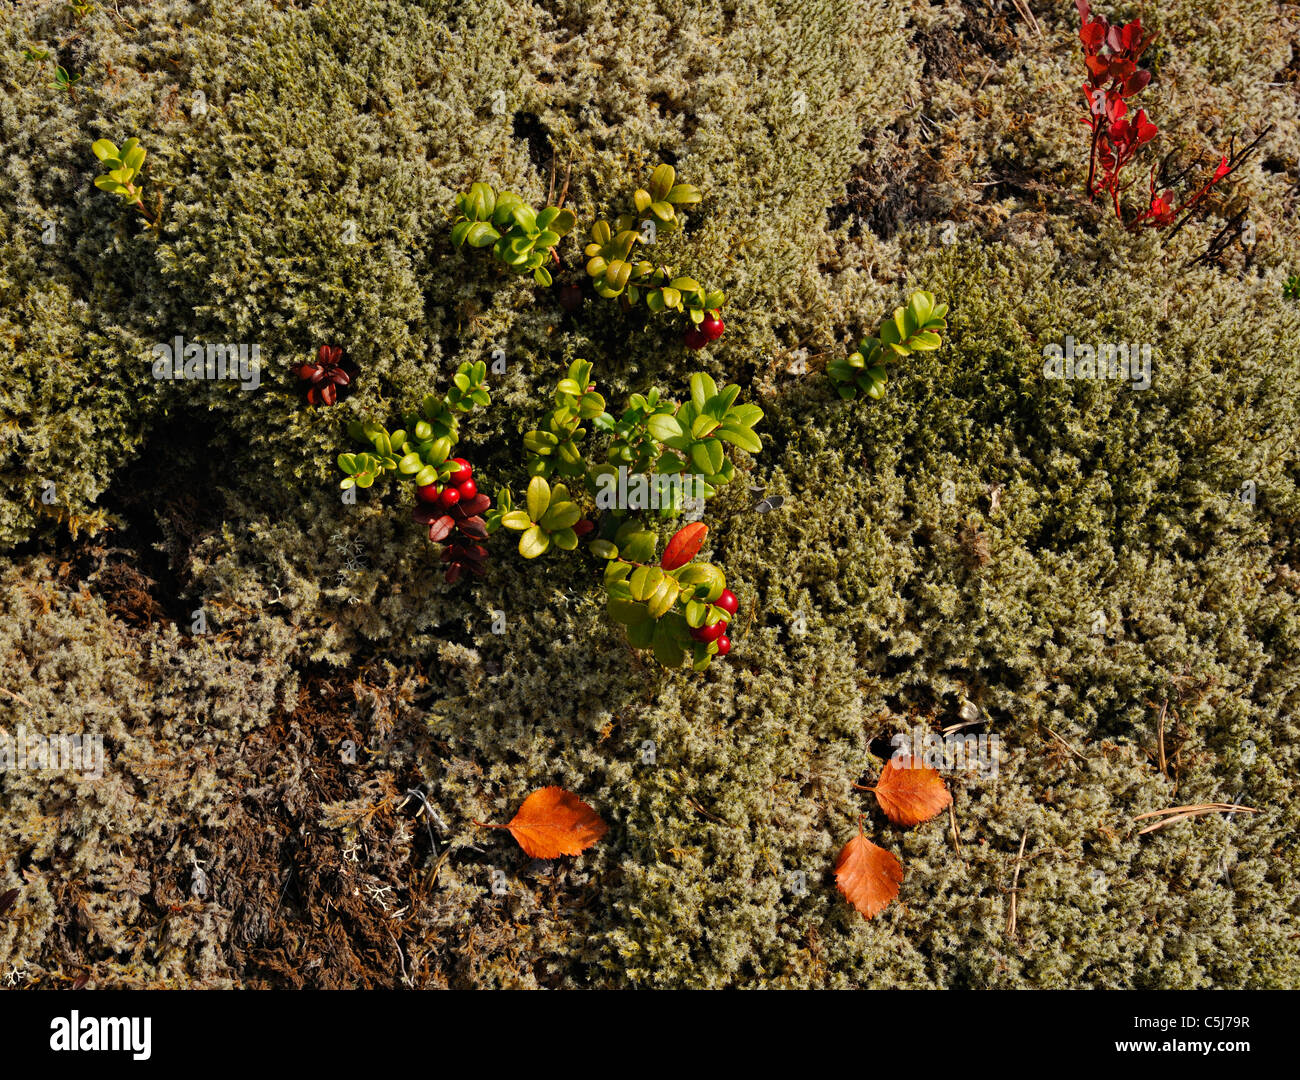 An arctic garden of moss, autumn leaves and dwarf shrubs near Fauske, Norway. Stock Photo